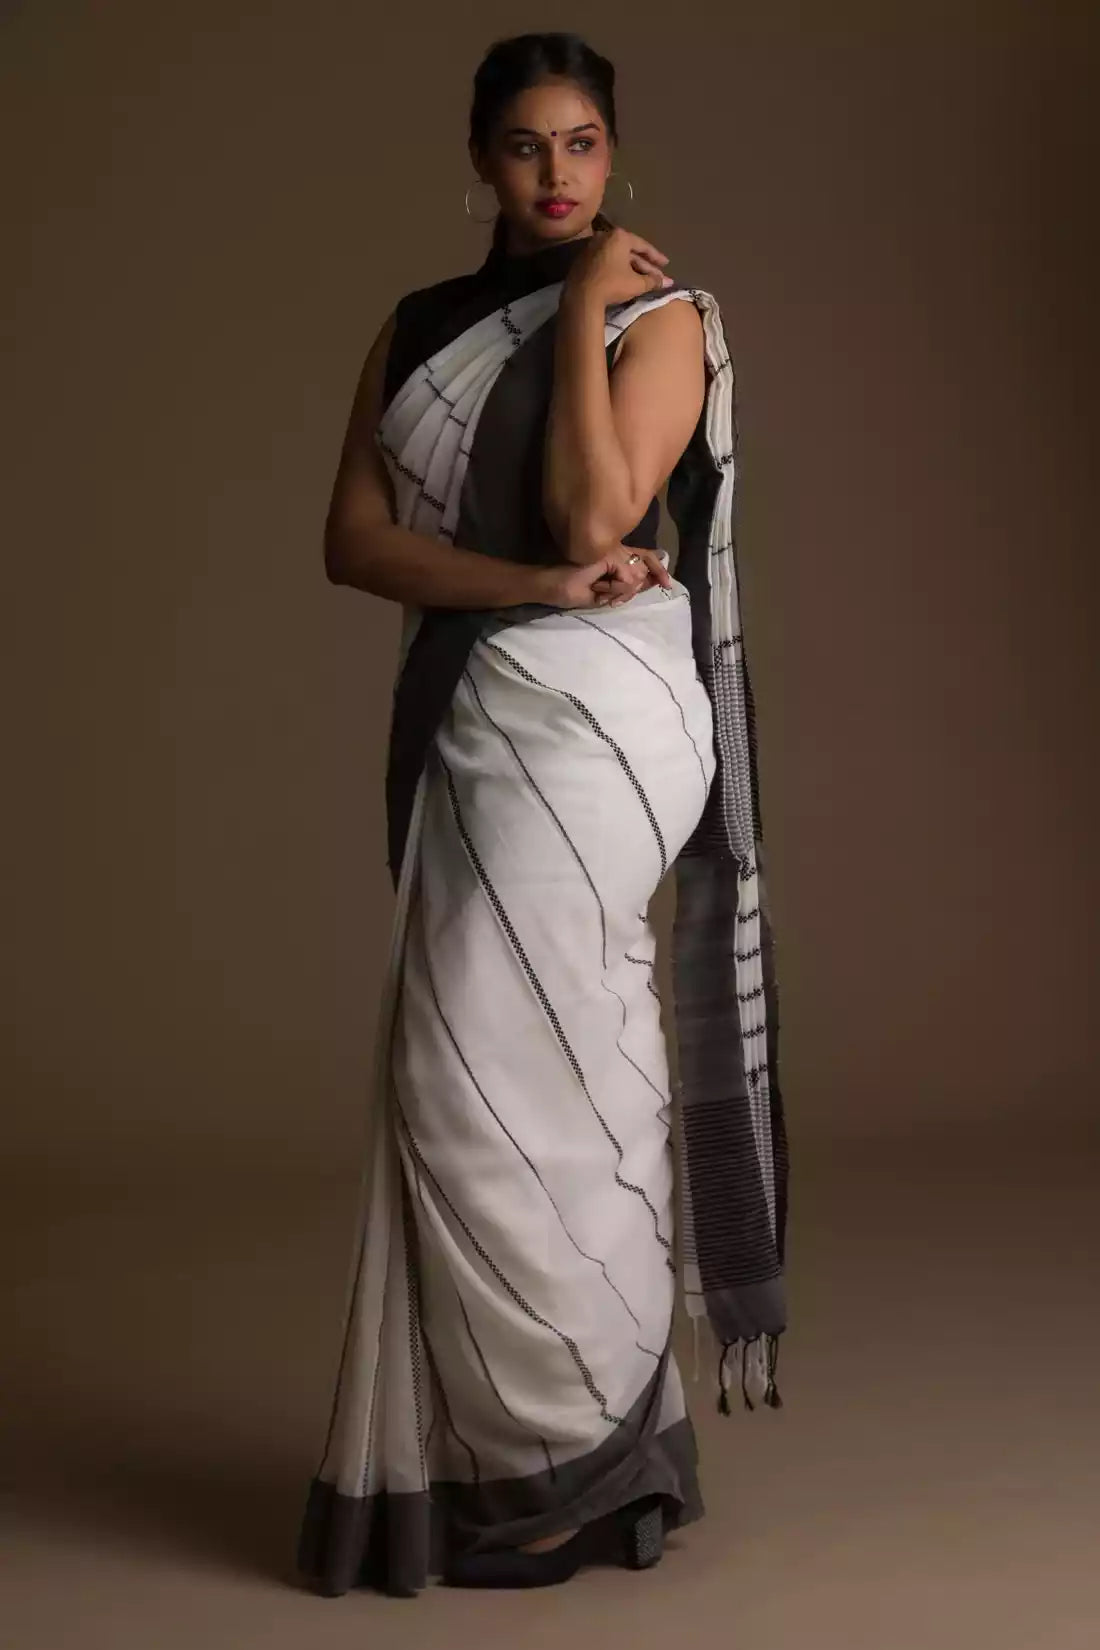 a woman in a white saree with black stripes on it